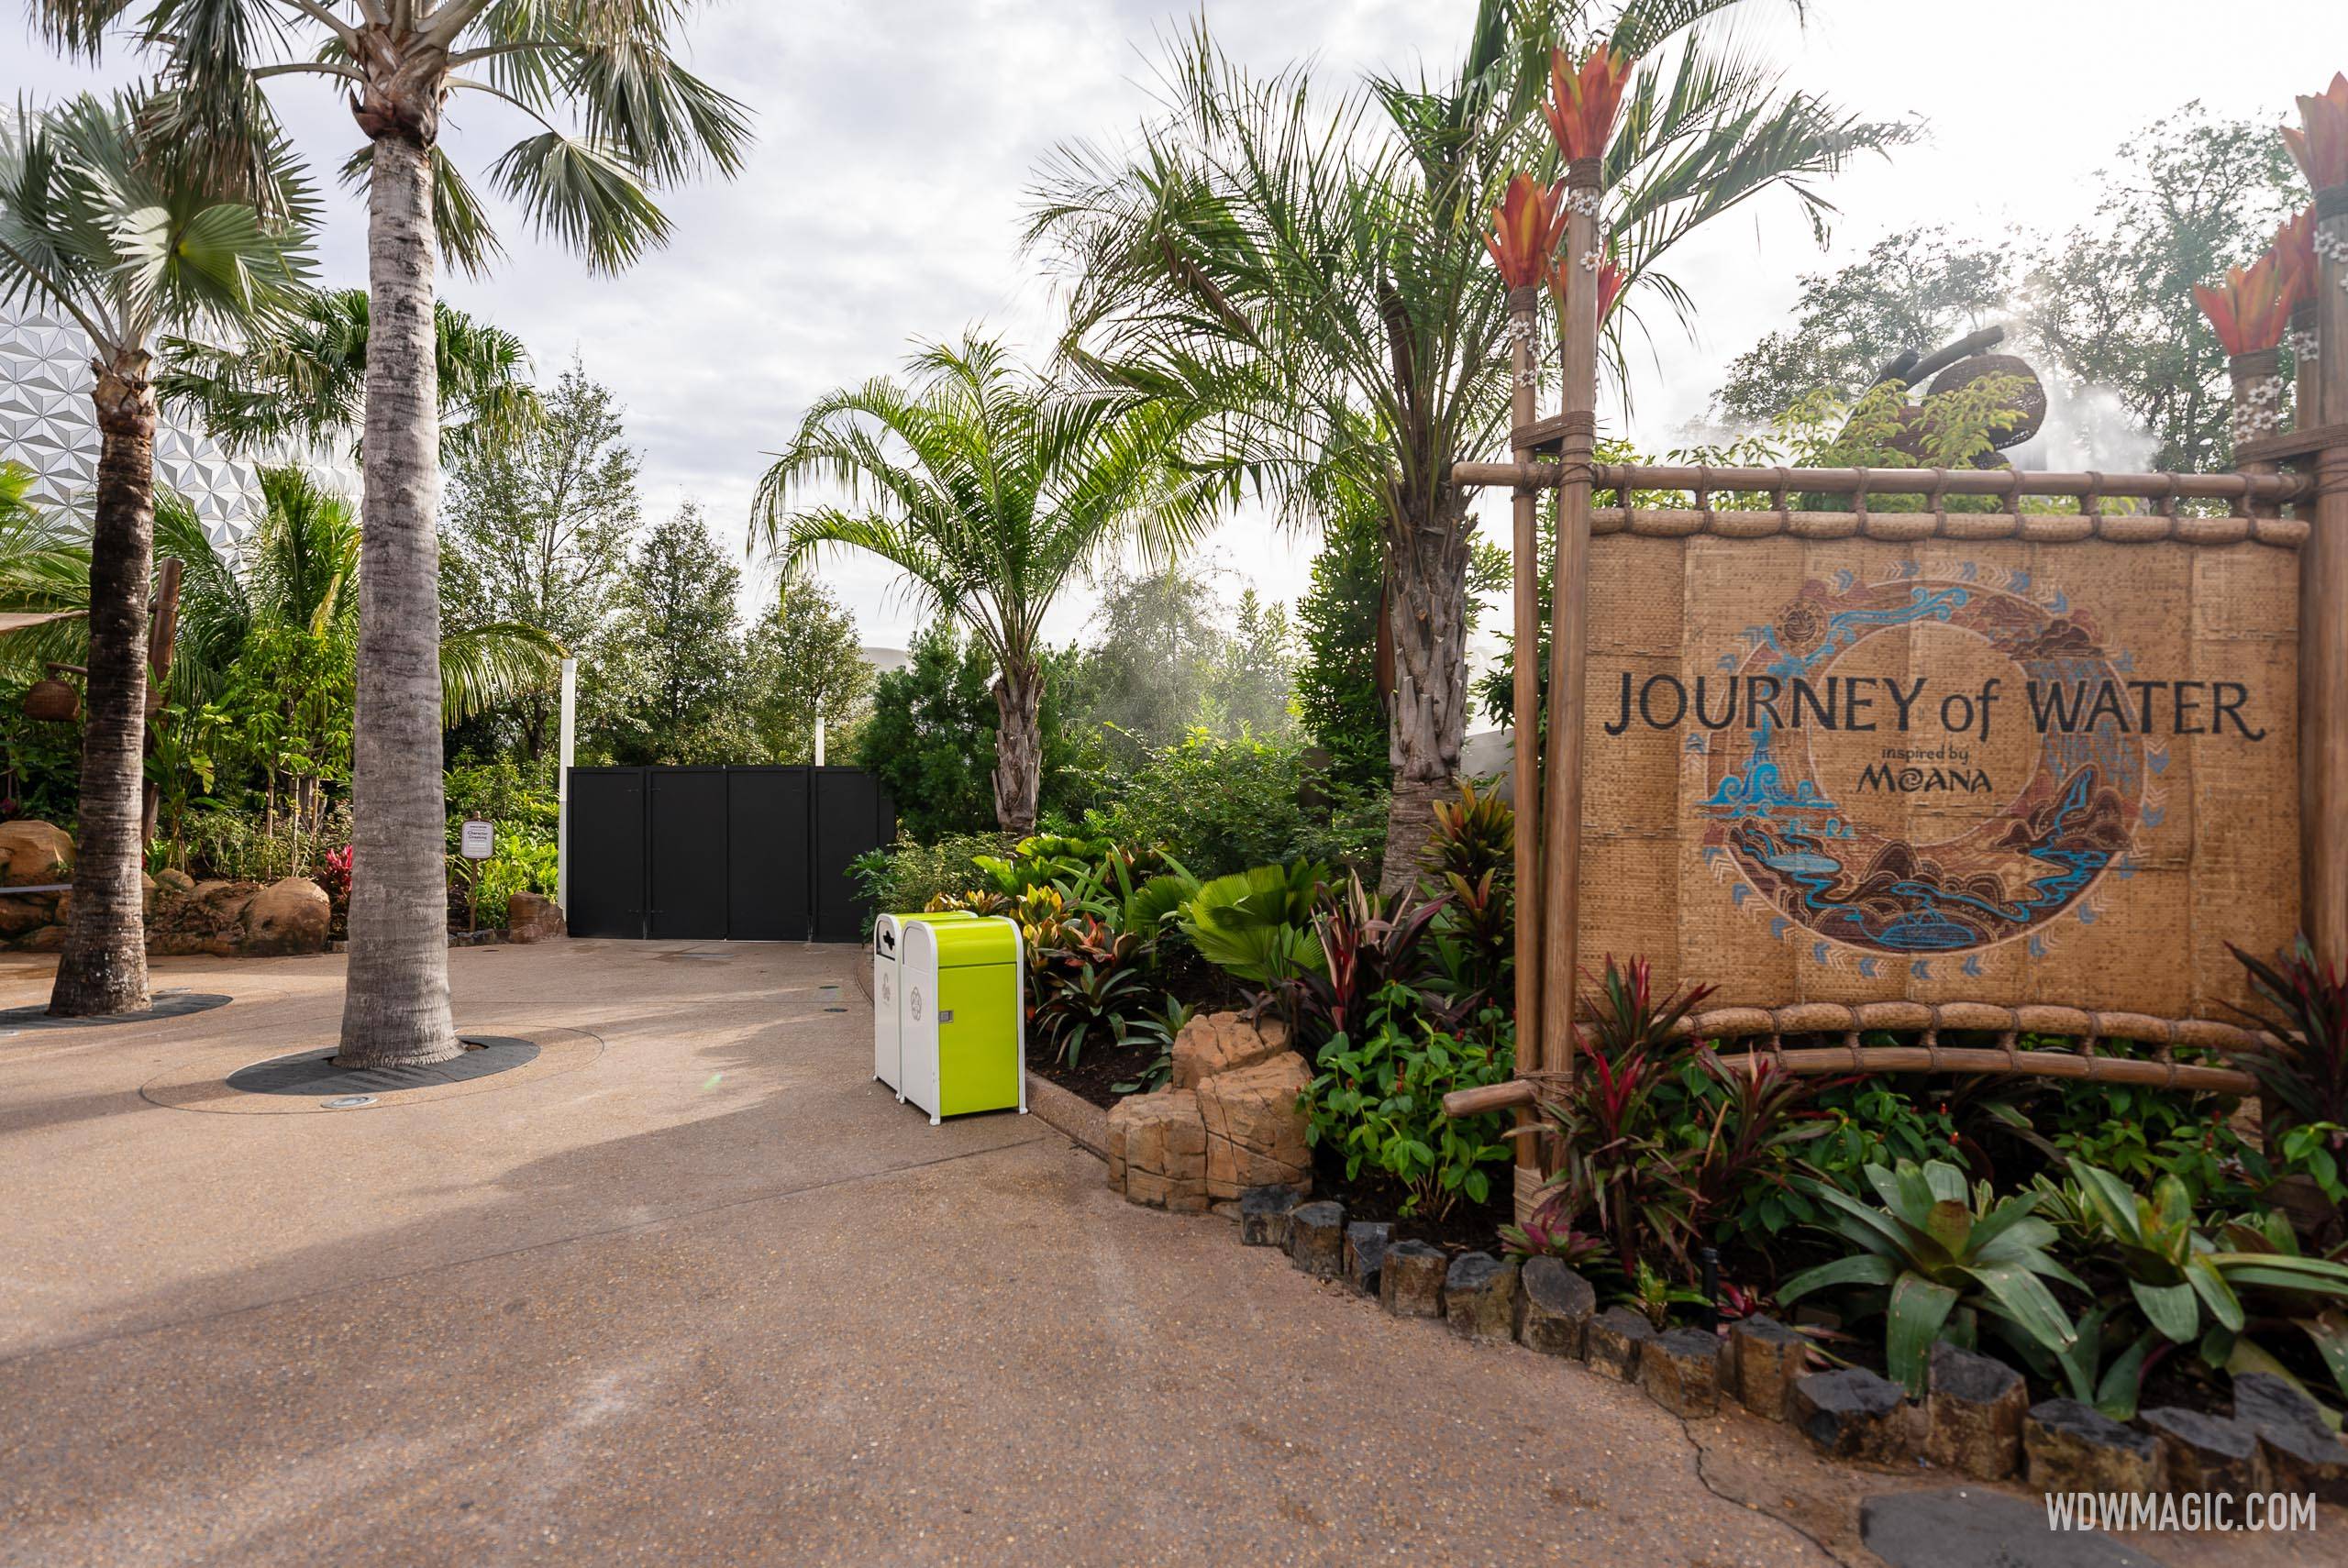 Walkway alongside EPCOT's Journey of Water remains closed following high-pressure leak